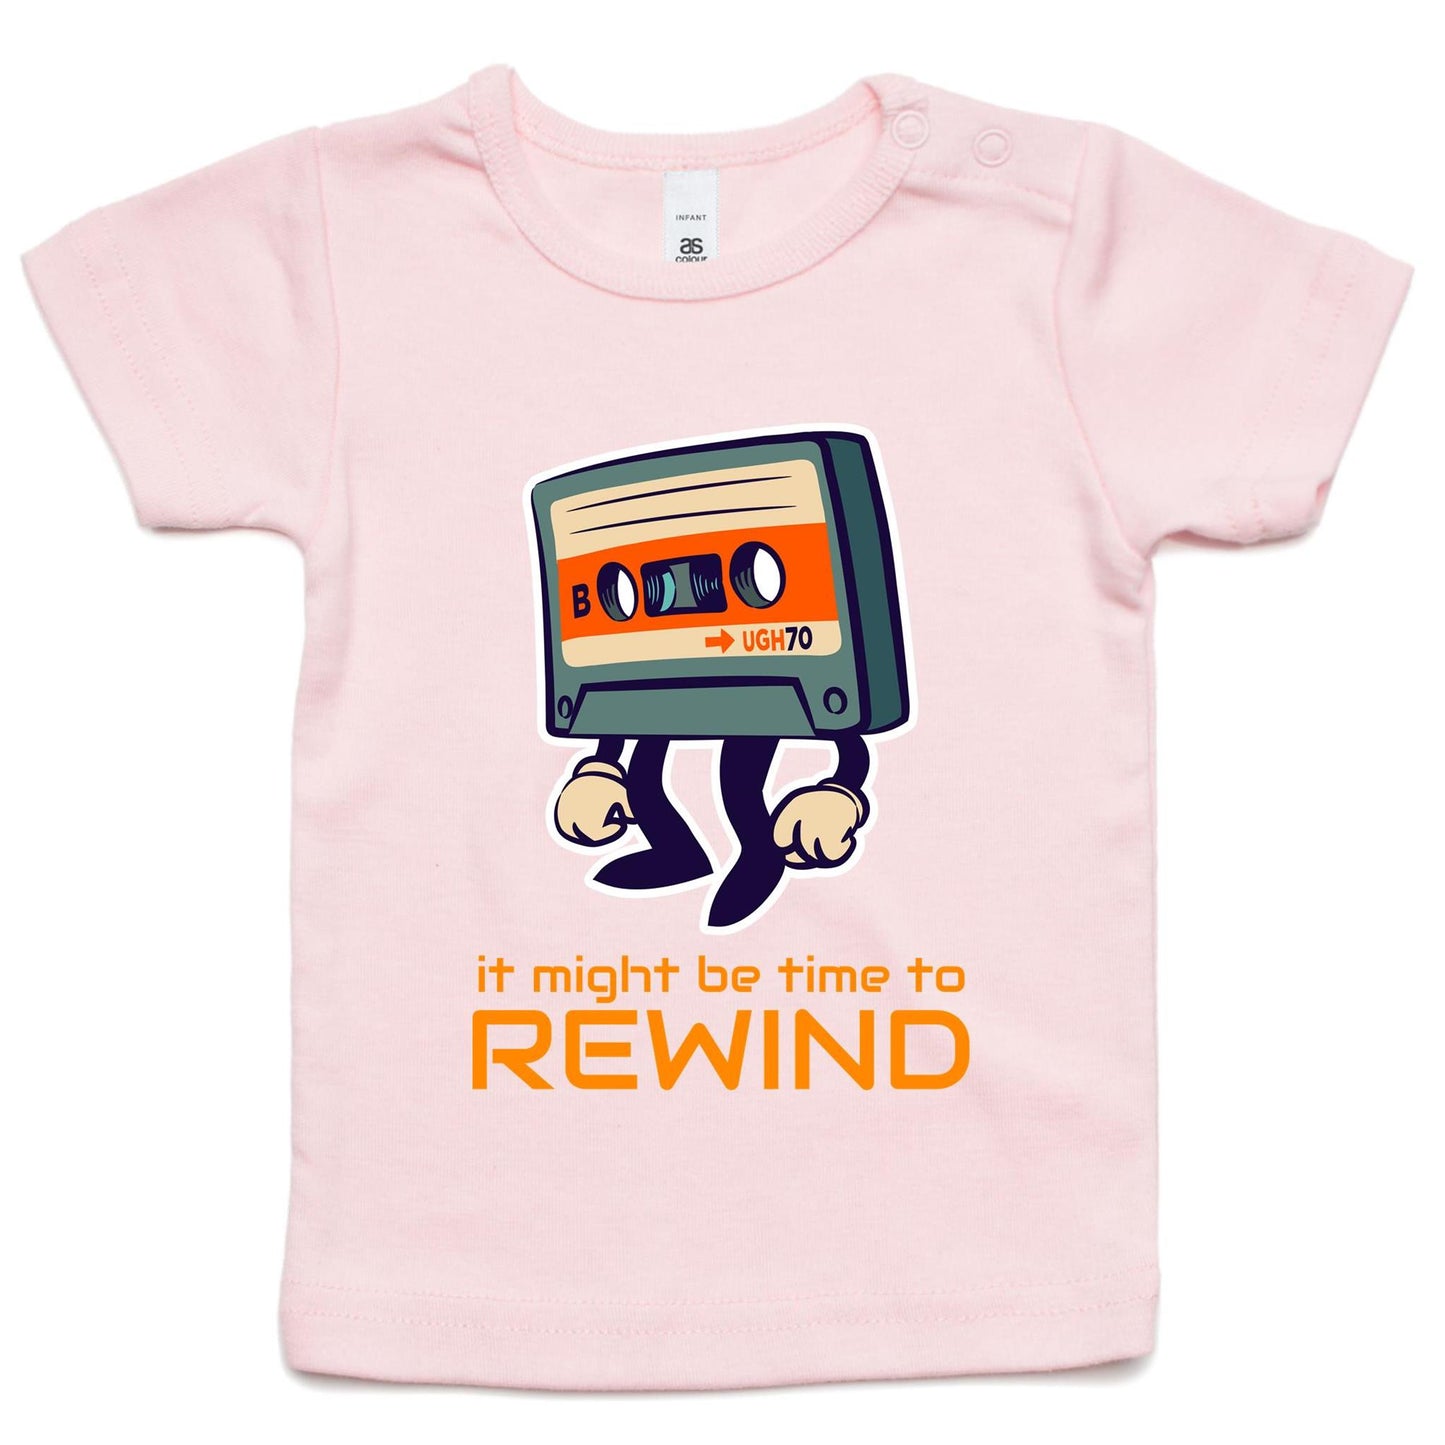 It Might Be Time To Rewind - Baby T-shirt Pink Baby T-shirt Music Retro